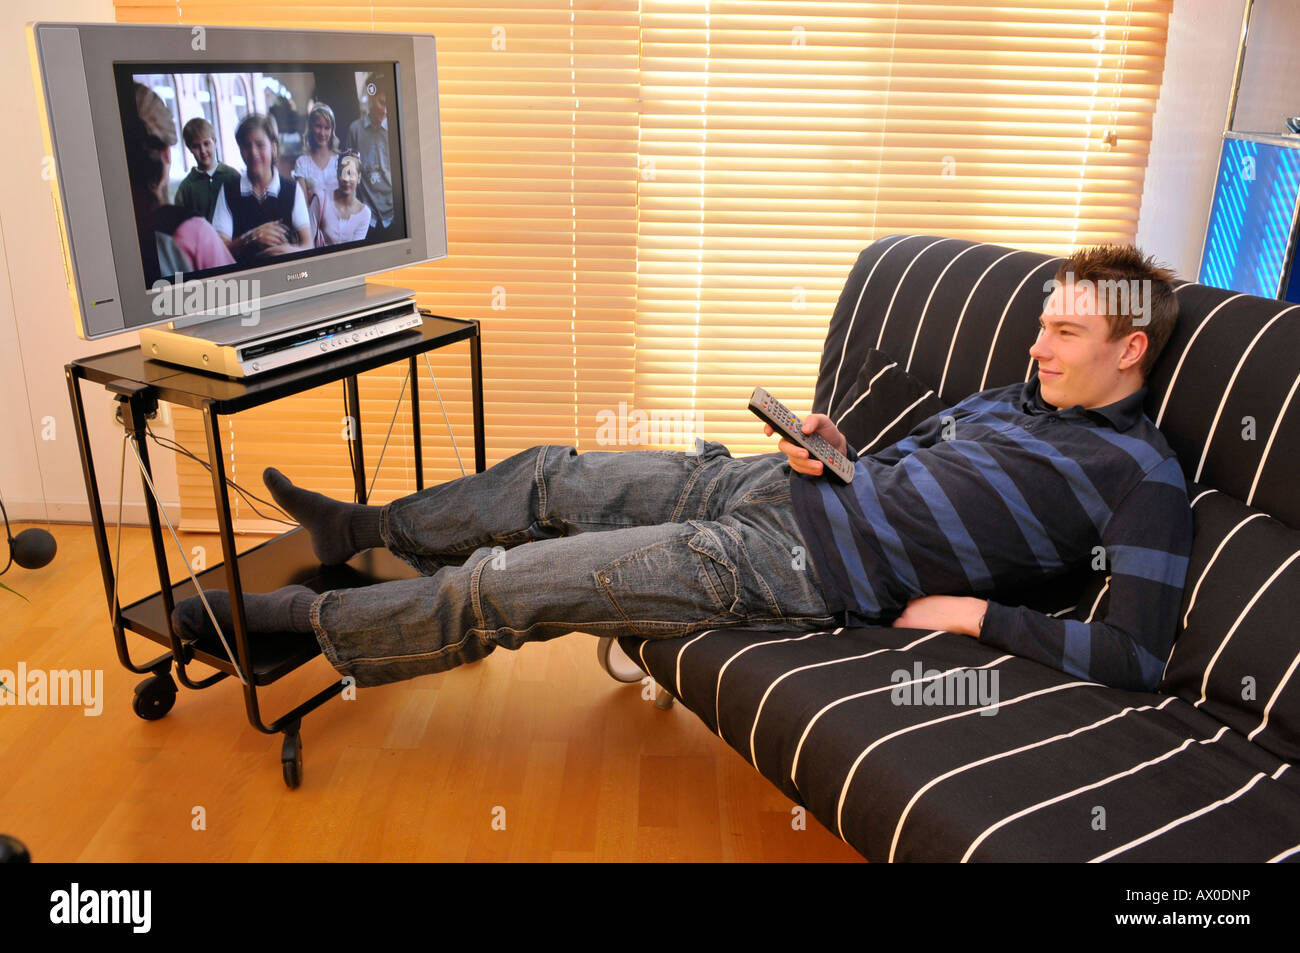 Teenager sitting on couch  watching  TV  Stock Photo 